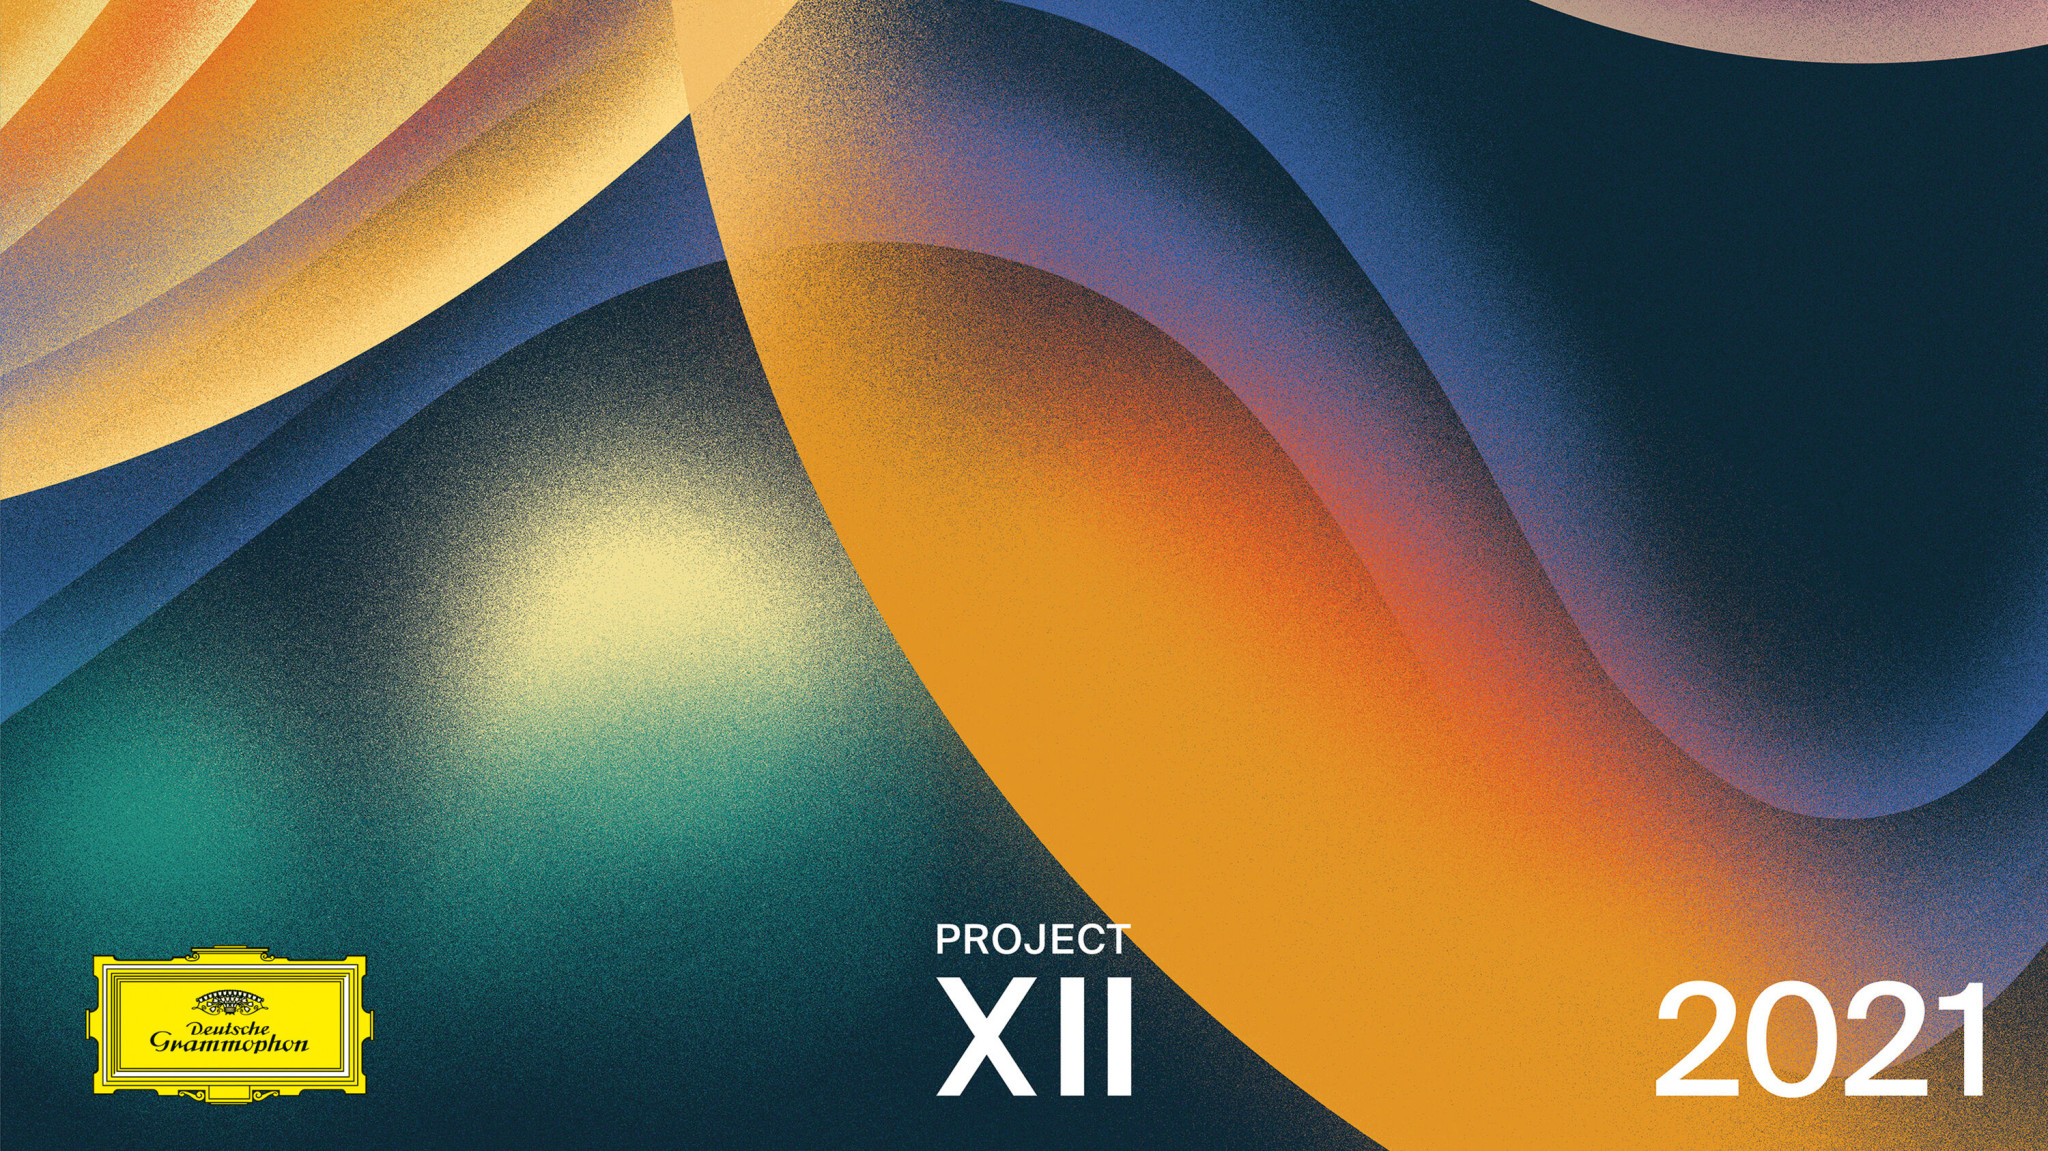 Project XII continues with this year’s recap vinyl edition